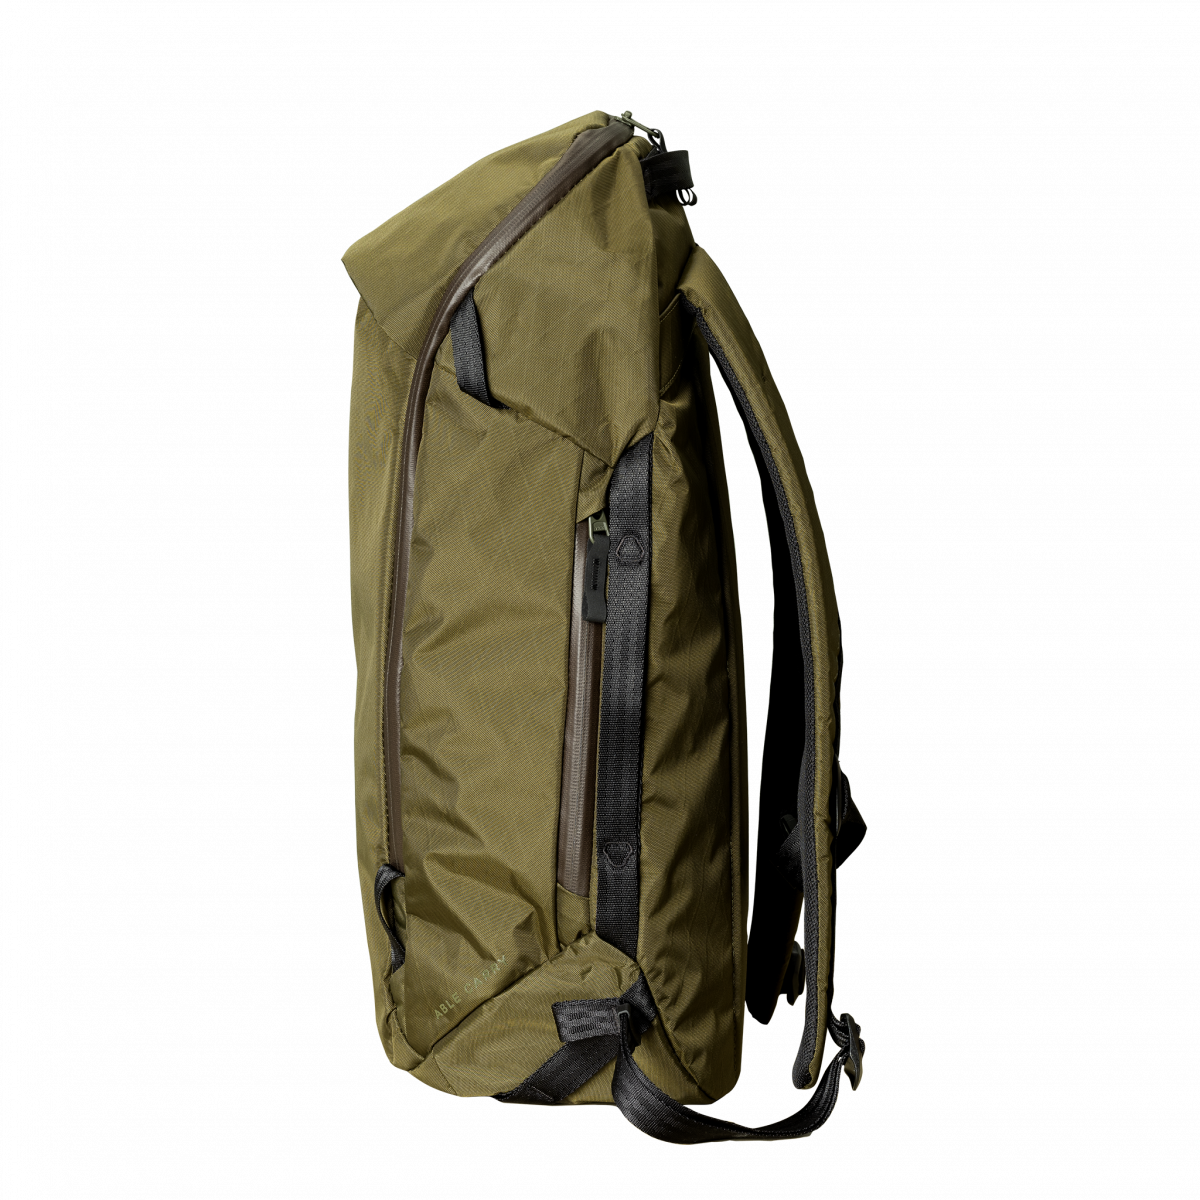 Able Carry Daybreaker 2 Backpack - Mukama